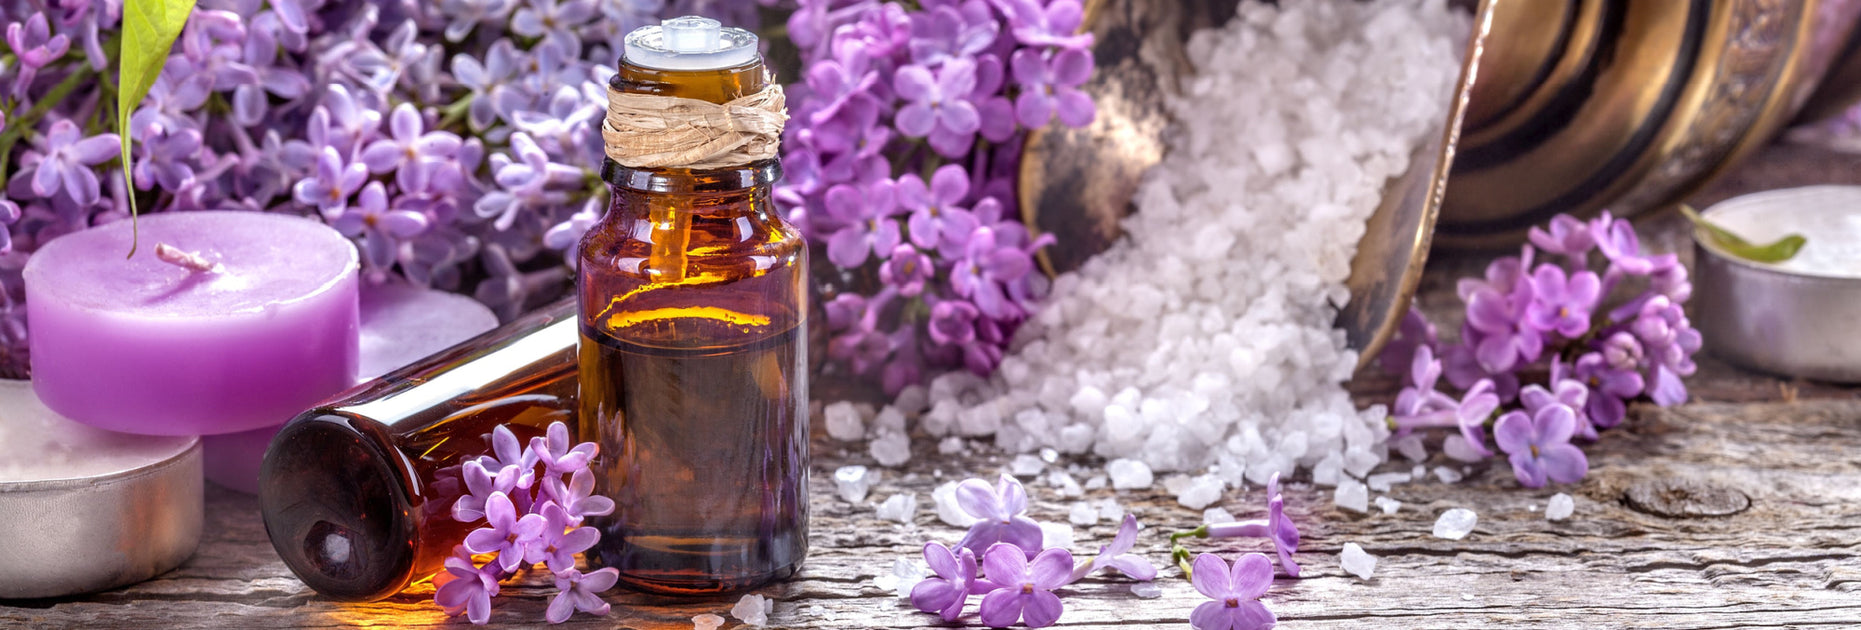 Lilac Essential Oil in a Small Bottle. Selective Focus Stock Image - Image  of essential, extract: 219226939